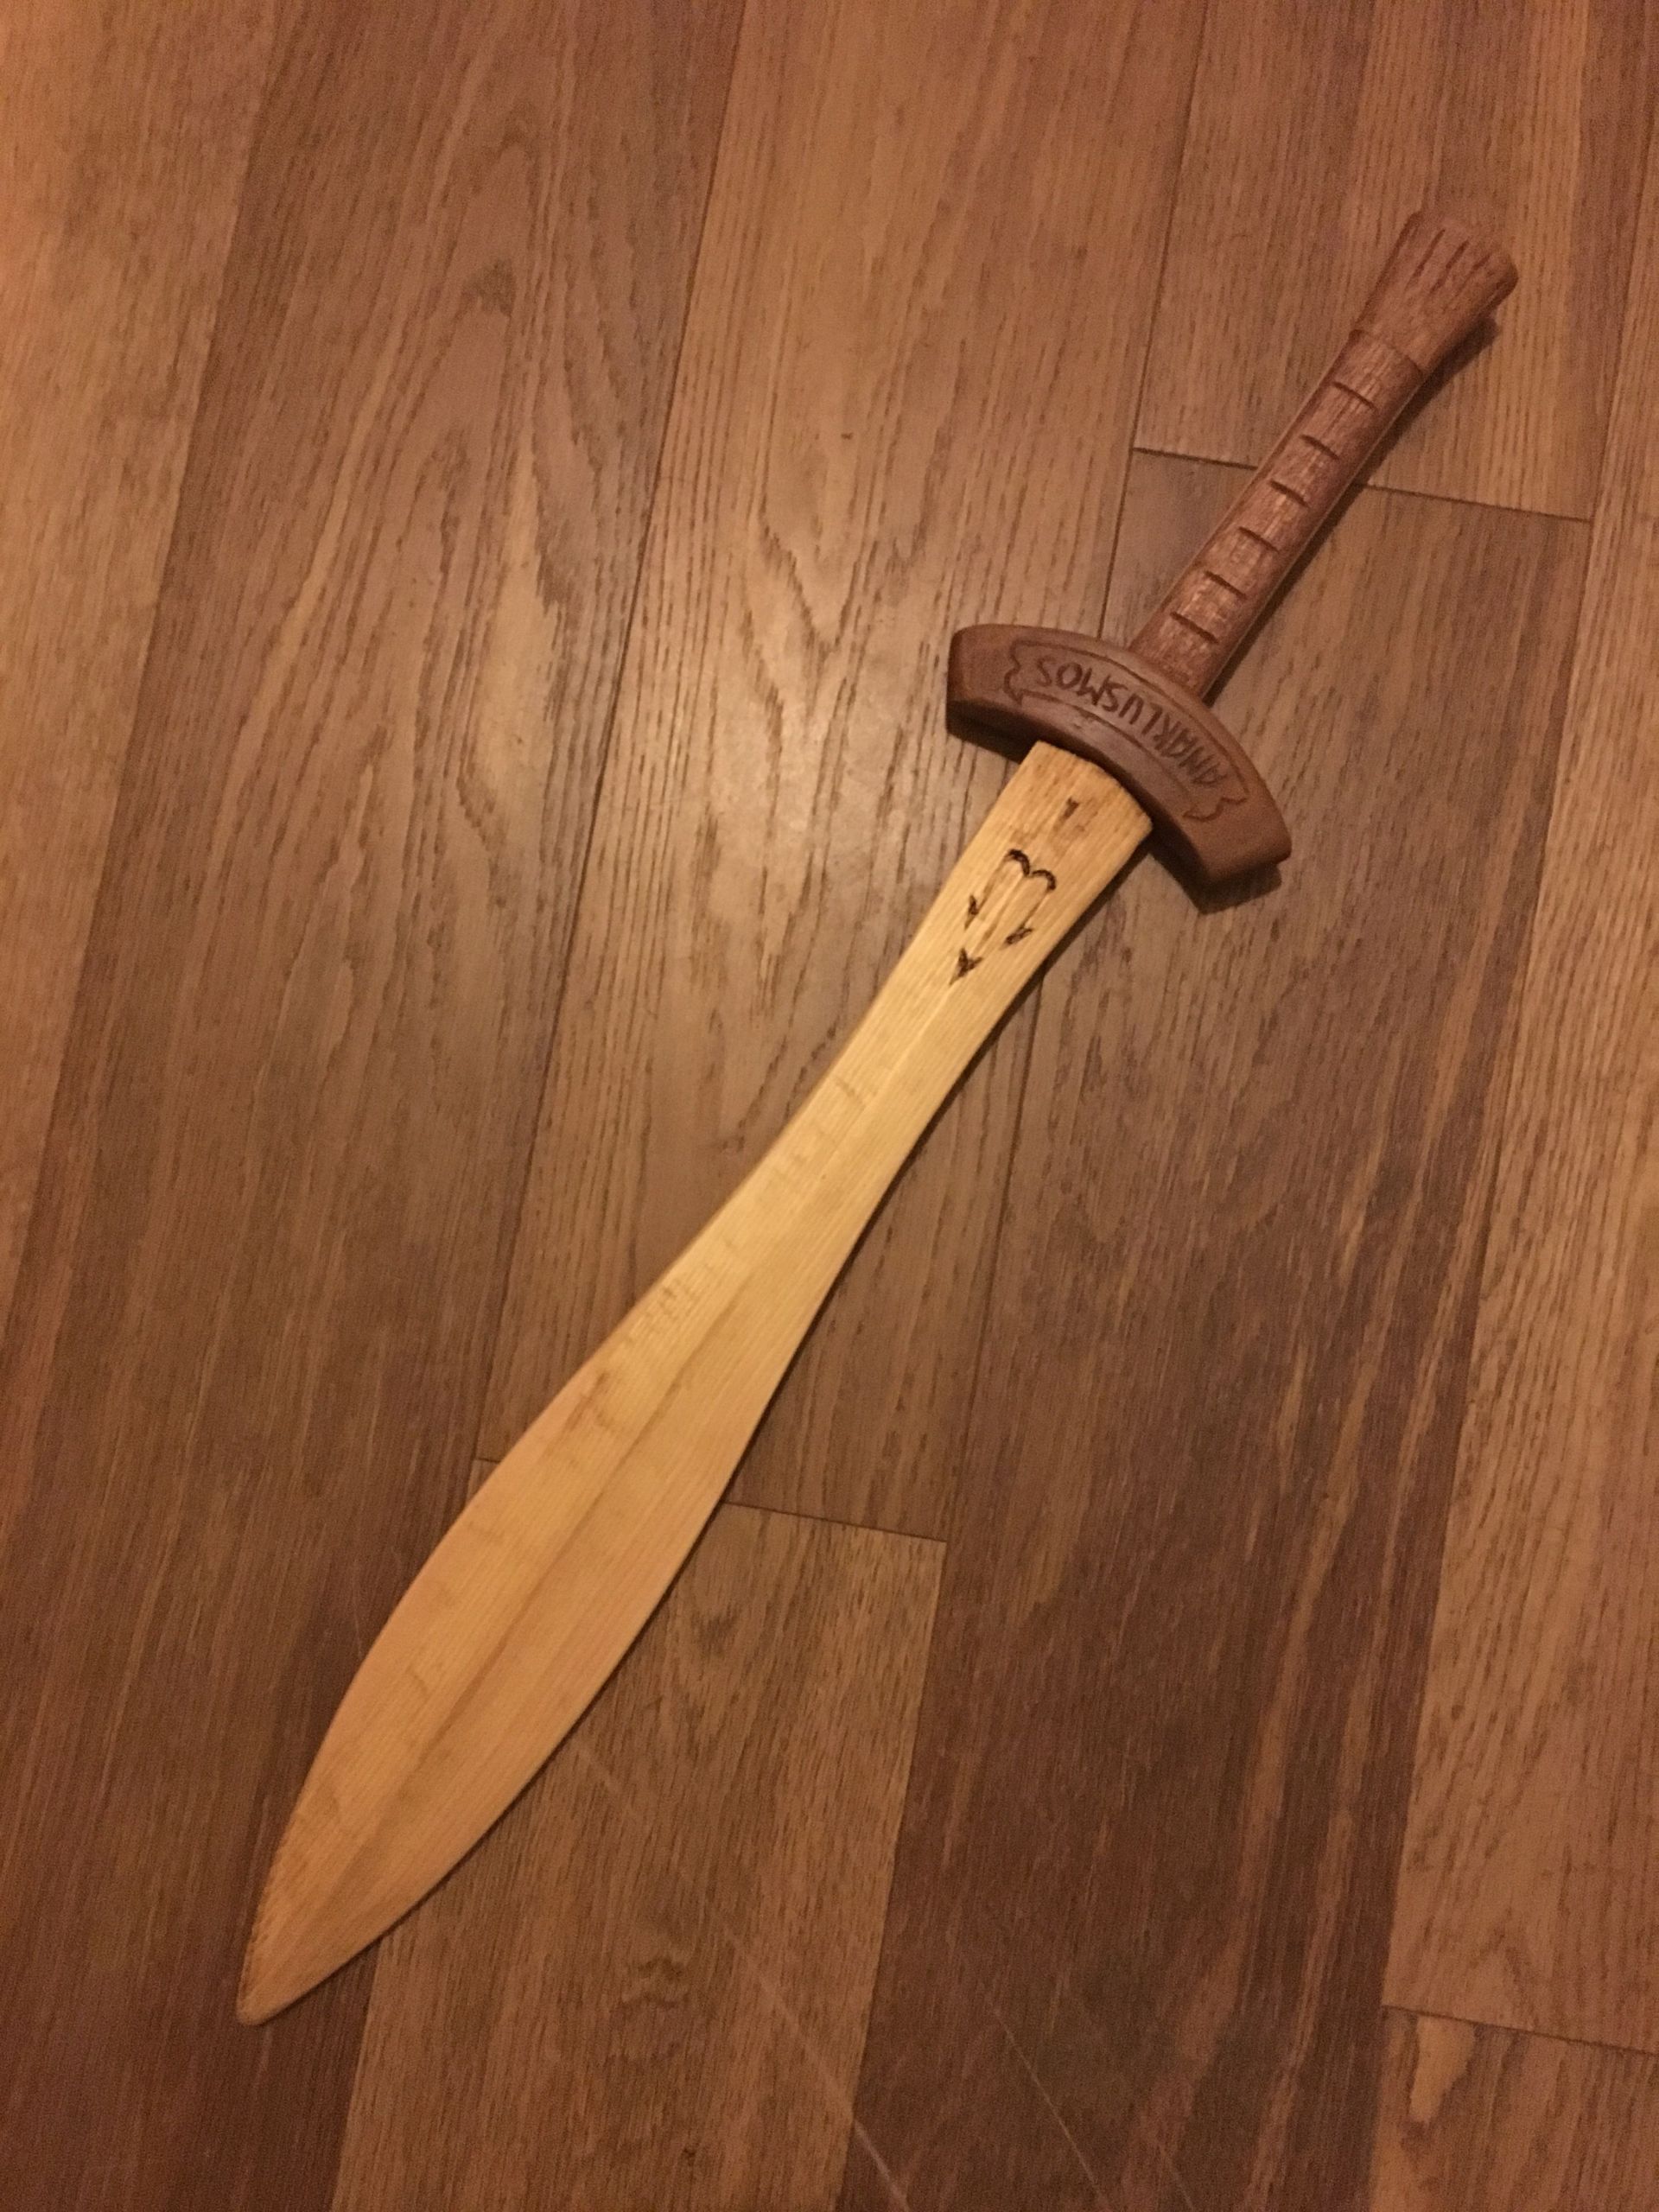 DIY Wood Sword
 Wooden sword Riptide from the Percy Jackson books made